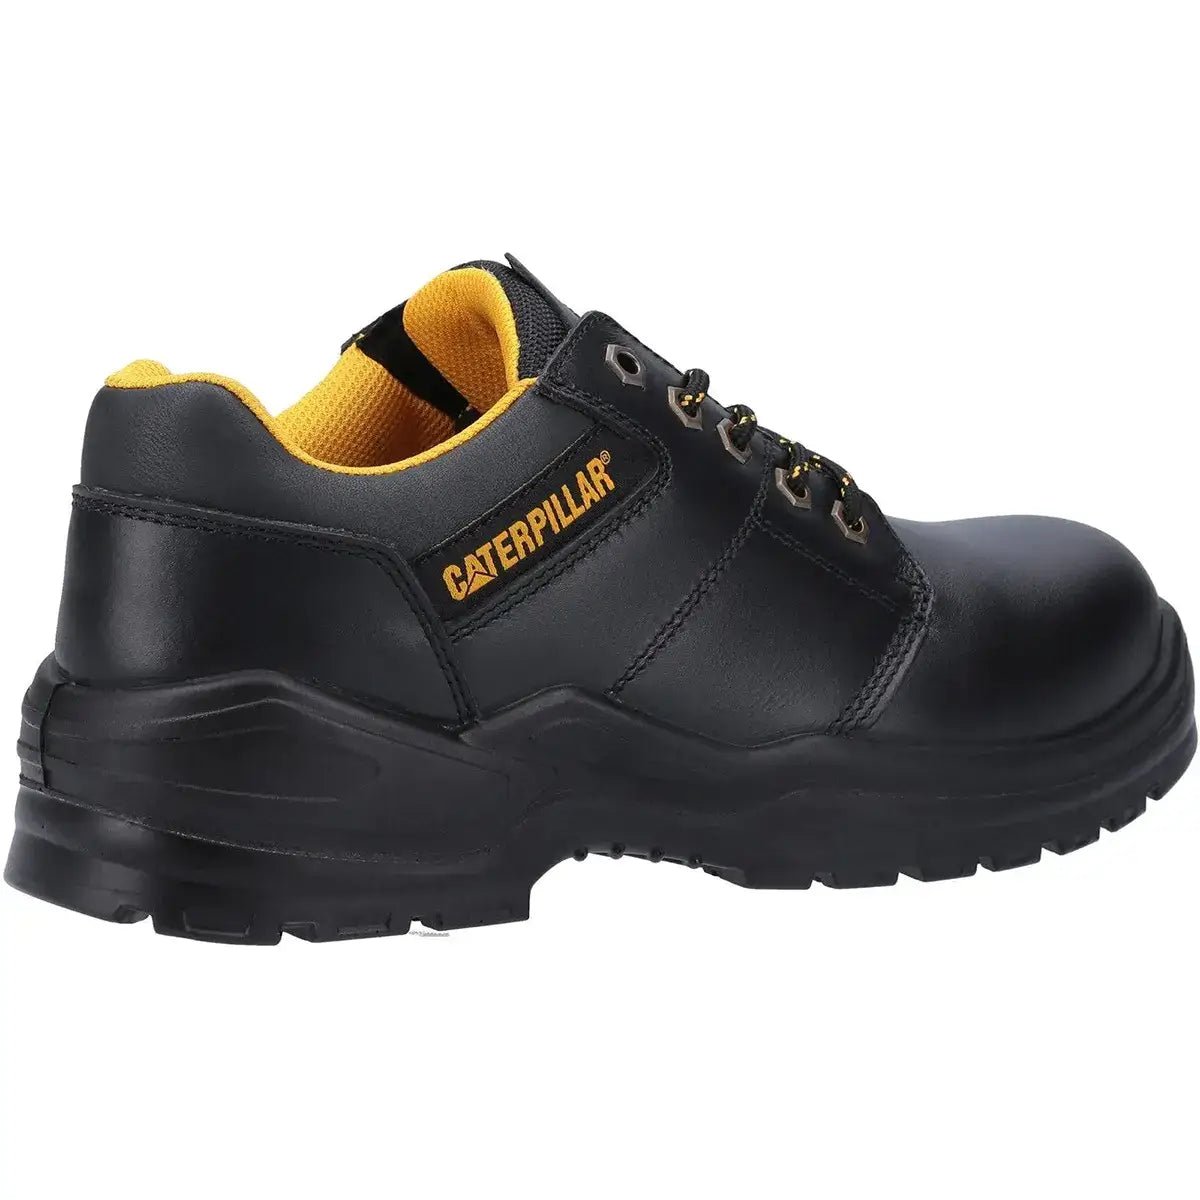 Caterpillar Striver Low S3 Steel Toe Cap Safety Shoes - Shoe Store Direct